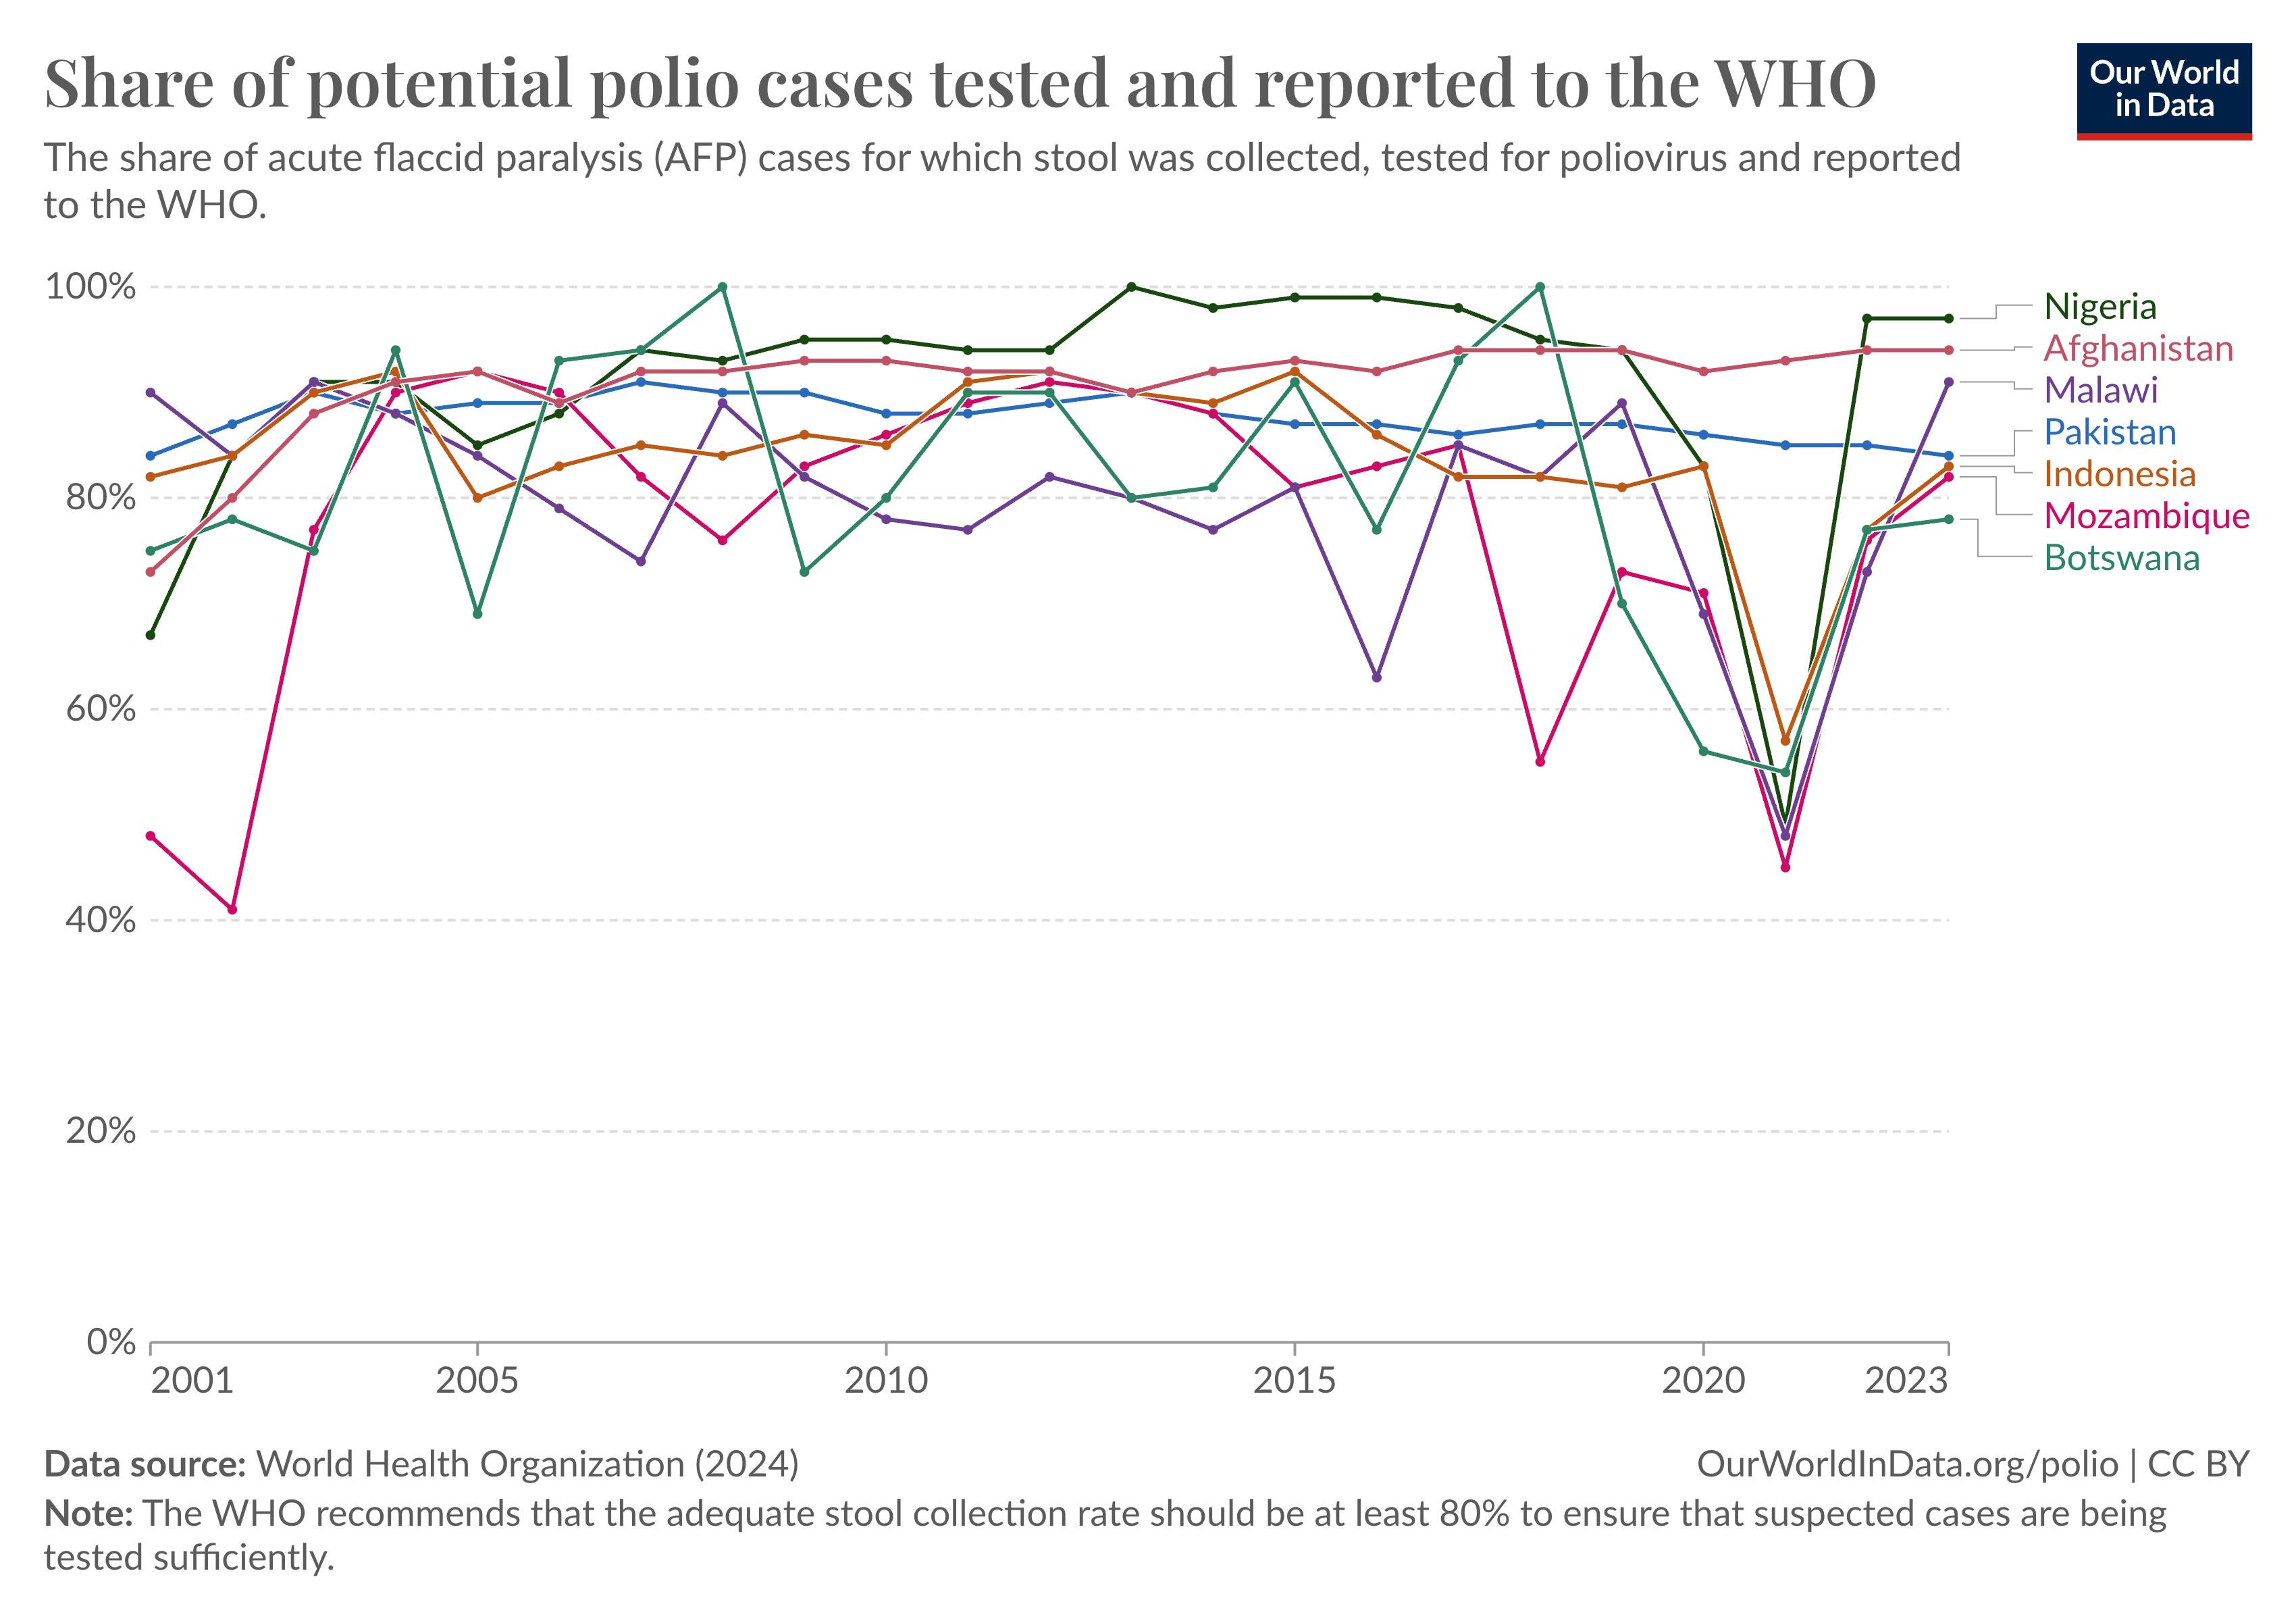 This chart, titled "Share of potential polio cases tested and reported to the WHO," shows how many suspected polio cases were actually tested for the virus and reported to the World Health Organization from 2001 to 2023. The graph tracks this data for several countries, including Nigeria, Afghanistan, Malawi, Pakistan, Indonesia, Mozambique, and Botswana. Ideally, at least 80% of suspected cases should be tested to ensure none are missed, as recommended by the WHO. The lines on the graph fluctuations for each country over the years, with a noticeable dip around 2020 during the global COVID-19 pandemic. However, the graph also shows a rebound in more recent years, indicating that testing for polio has picked back up again. This is important for keeping up the fight against polio and moving towards its eradication.